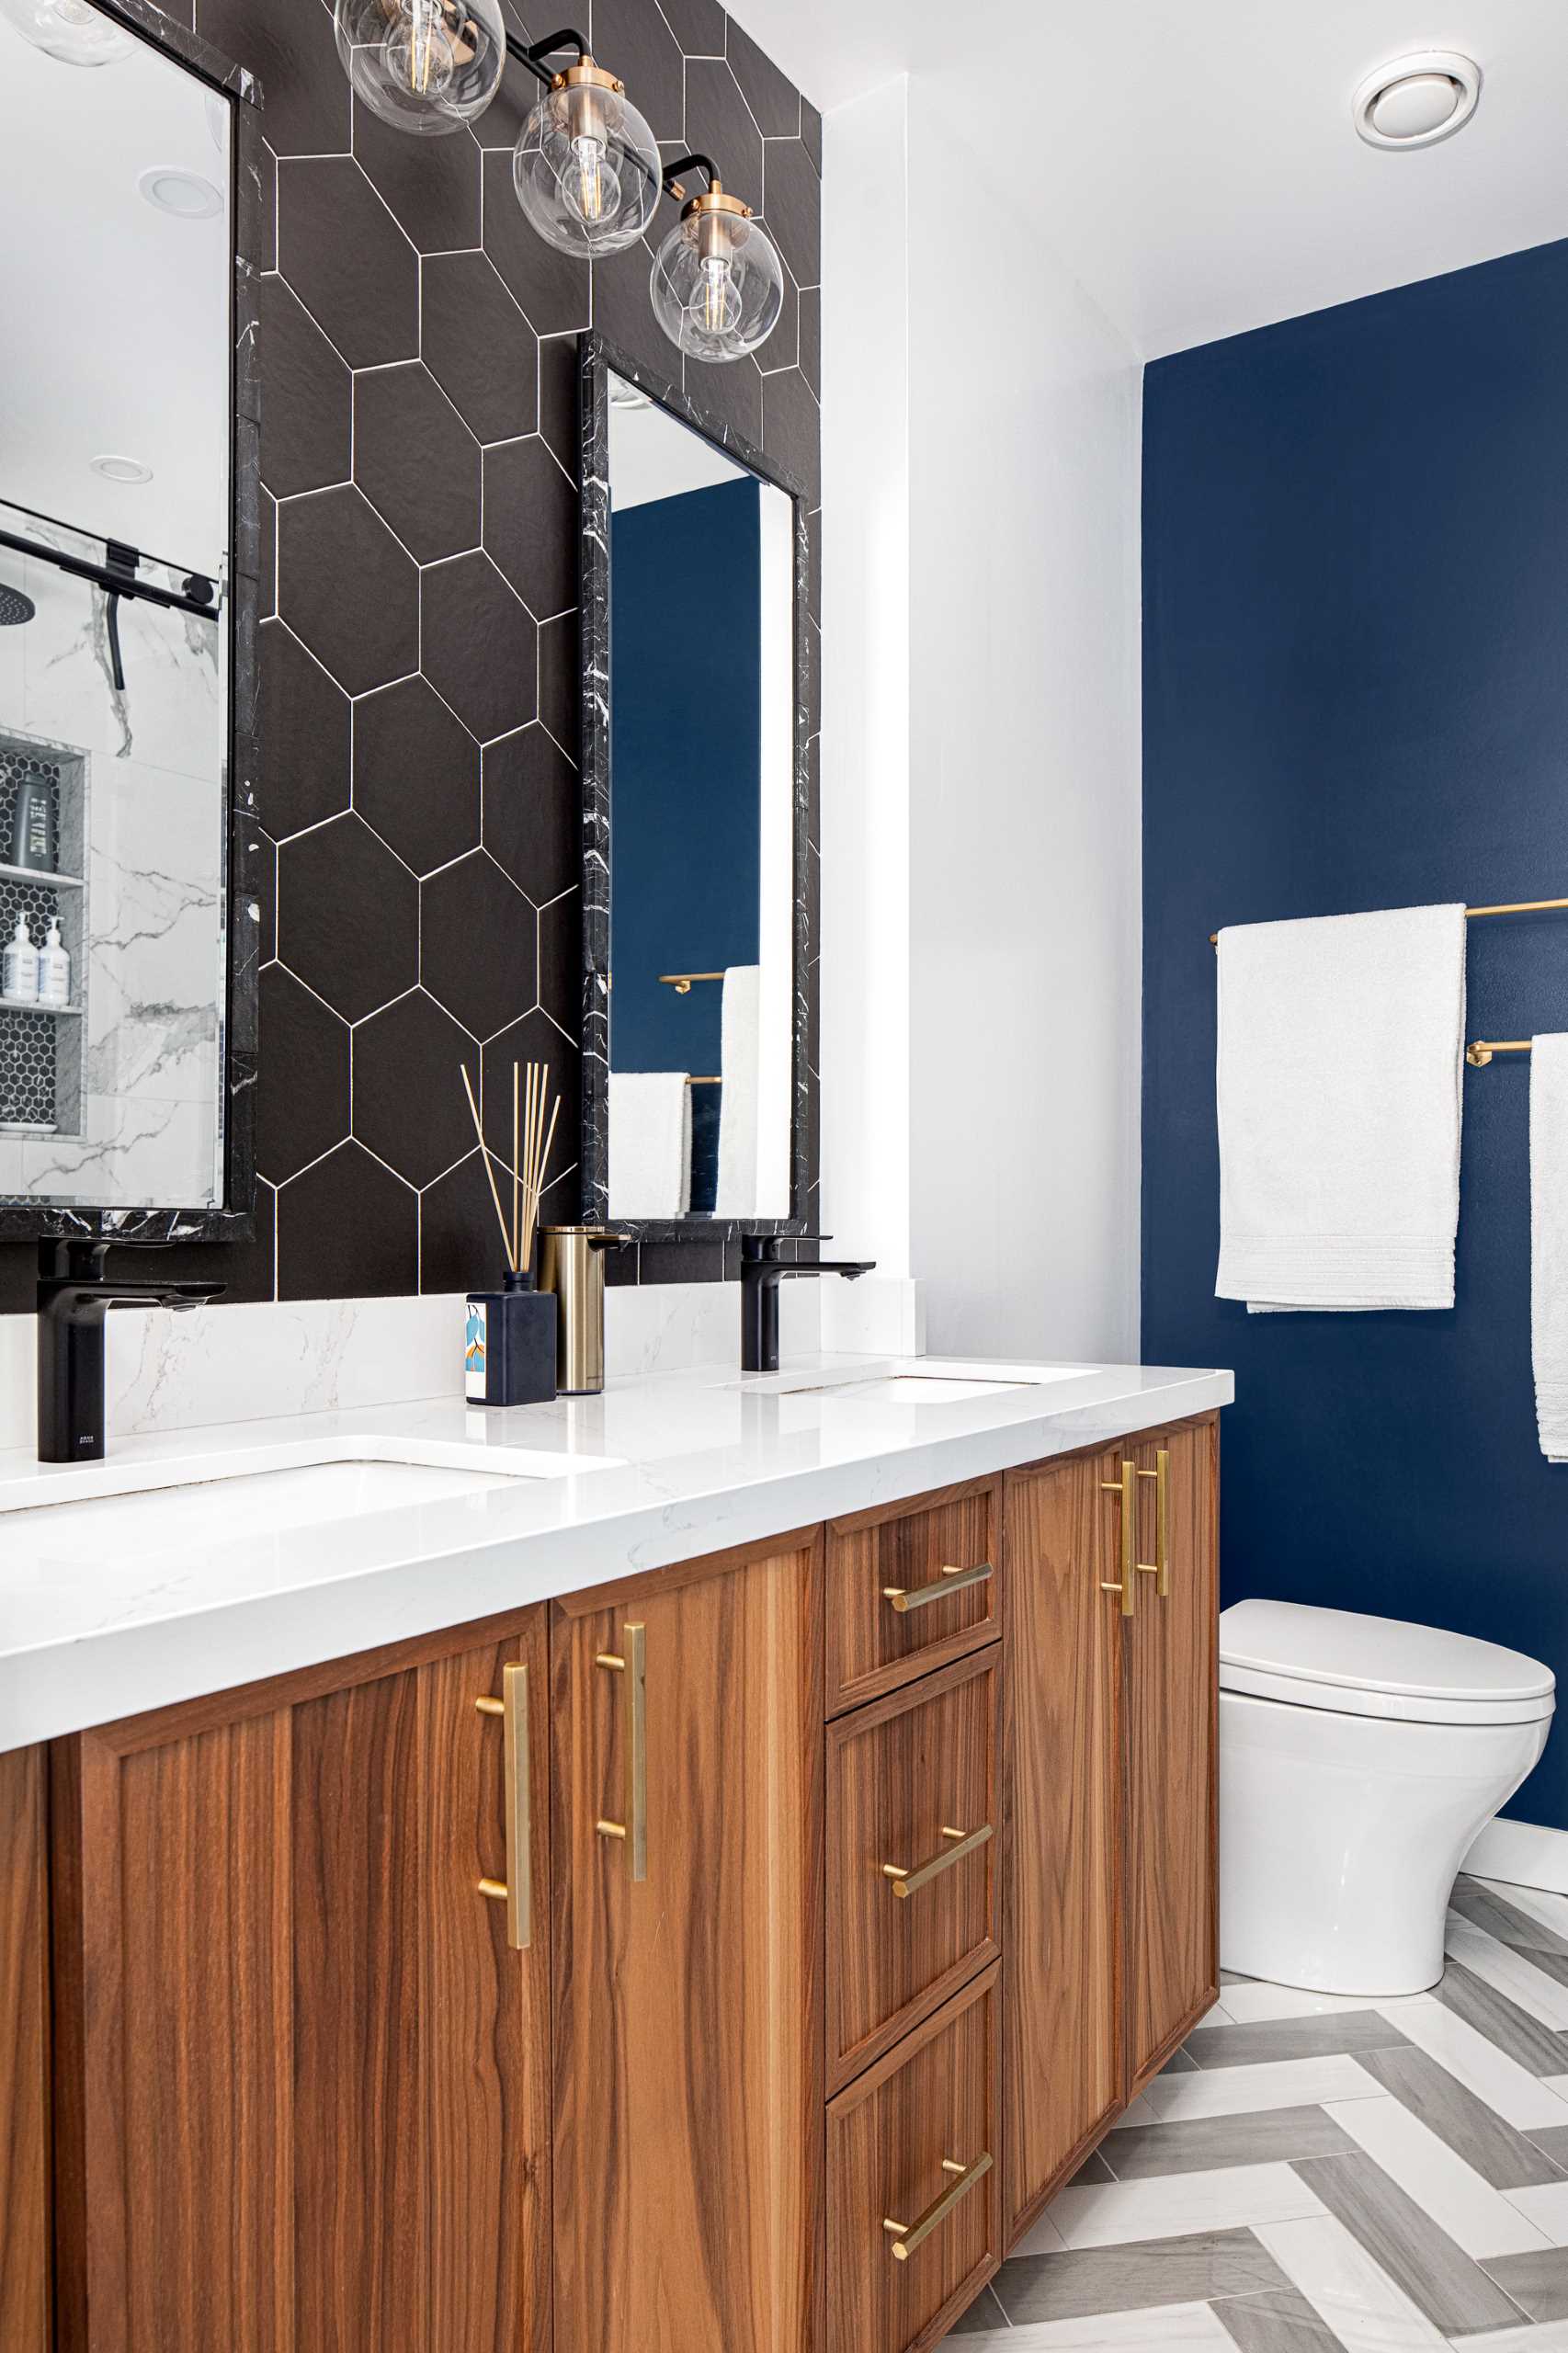 In this bathroom, black hexagonal tiles with white grout line the wall, while another wall, painted a deep blue adds a touch of color.